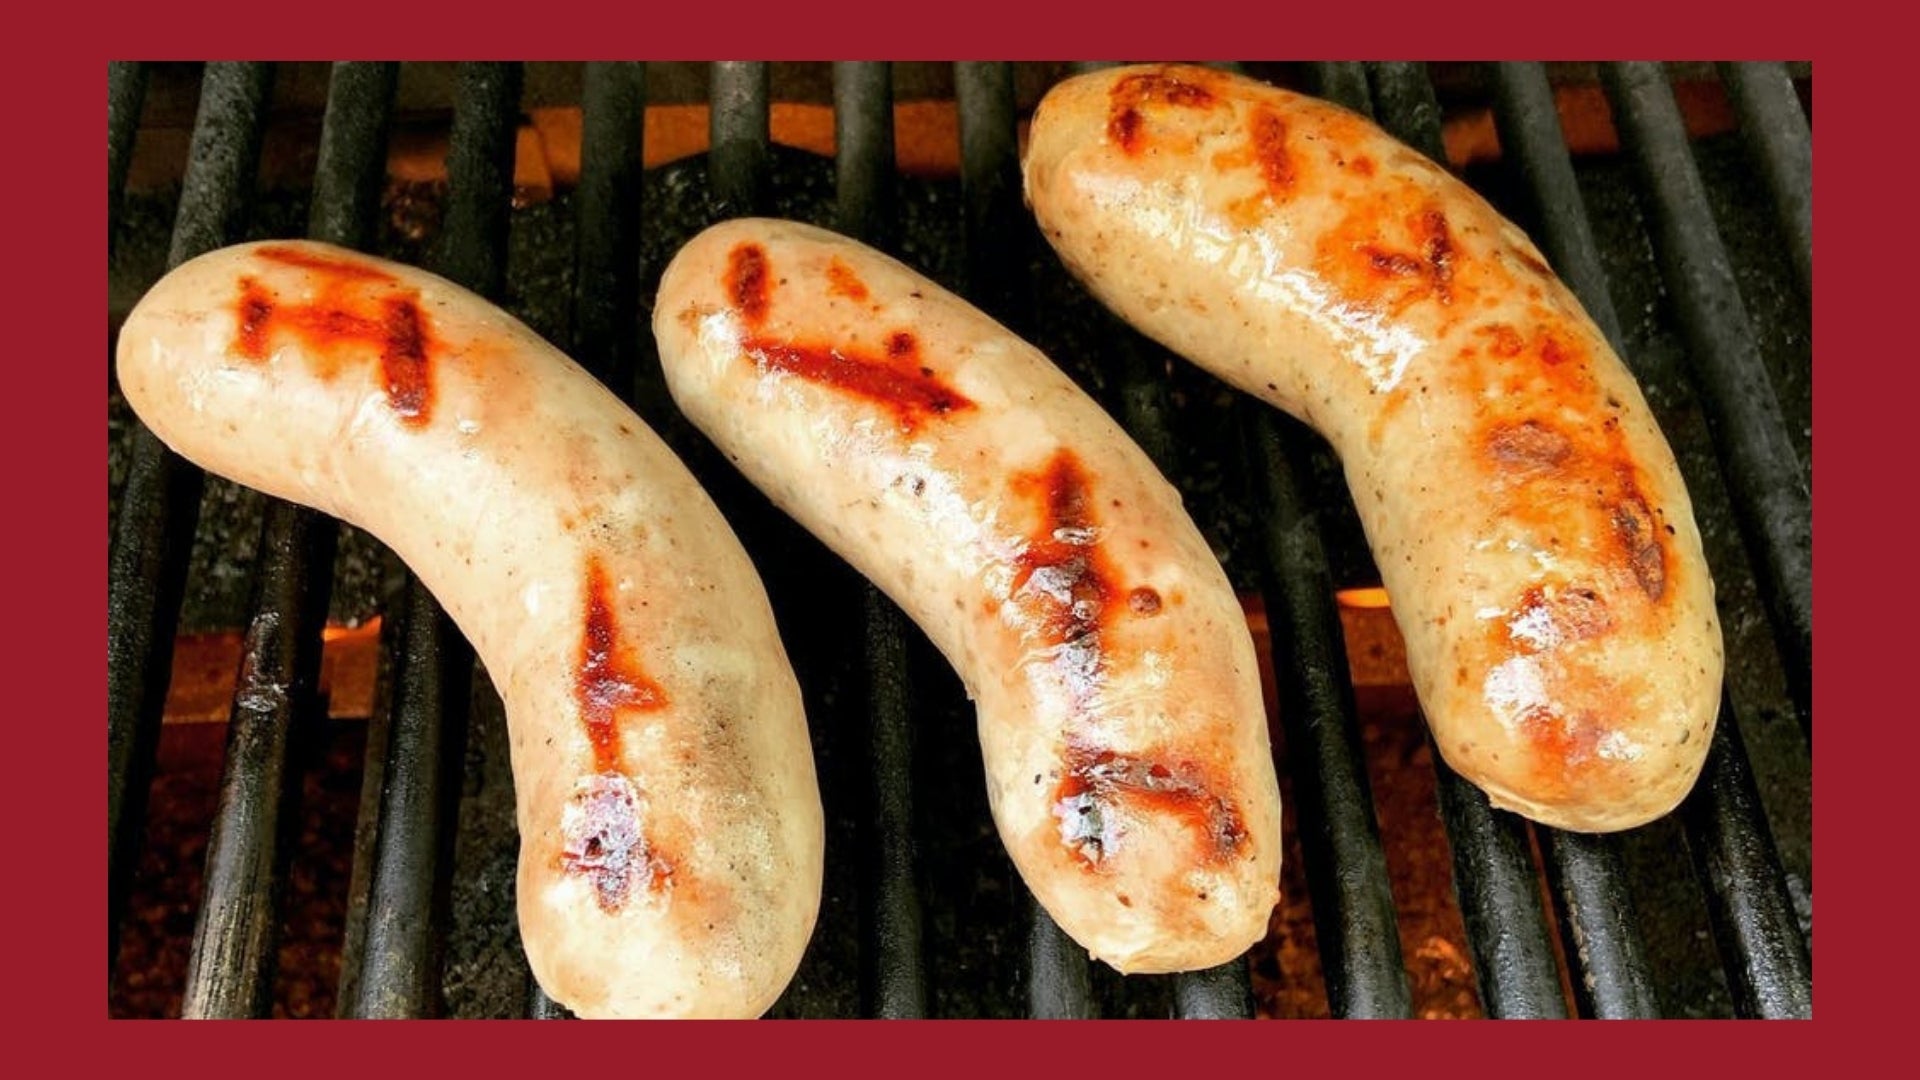 Bratwursts being cooked on a grill with grill marks on them.